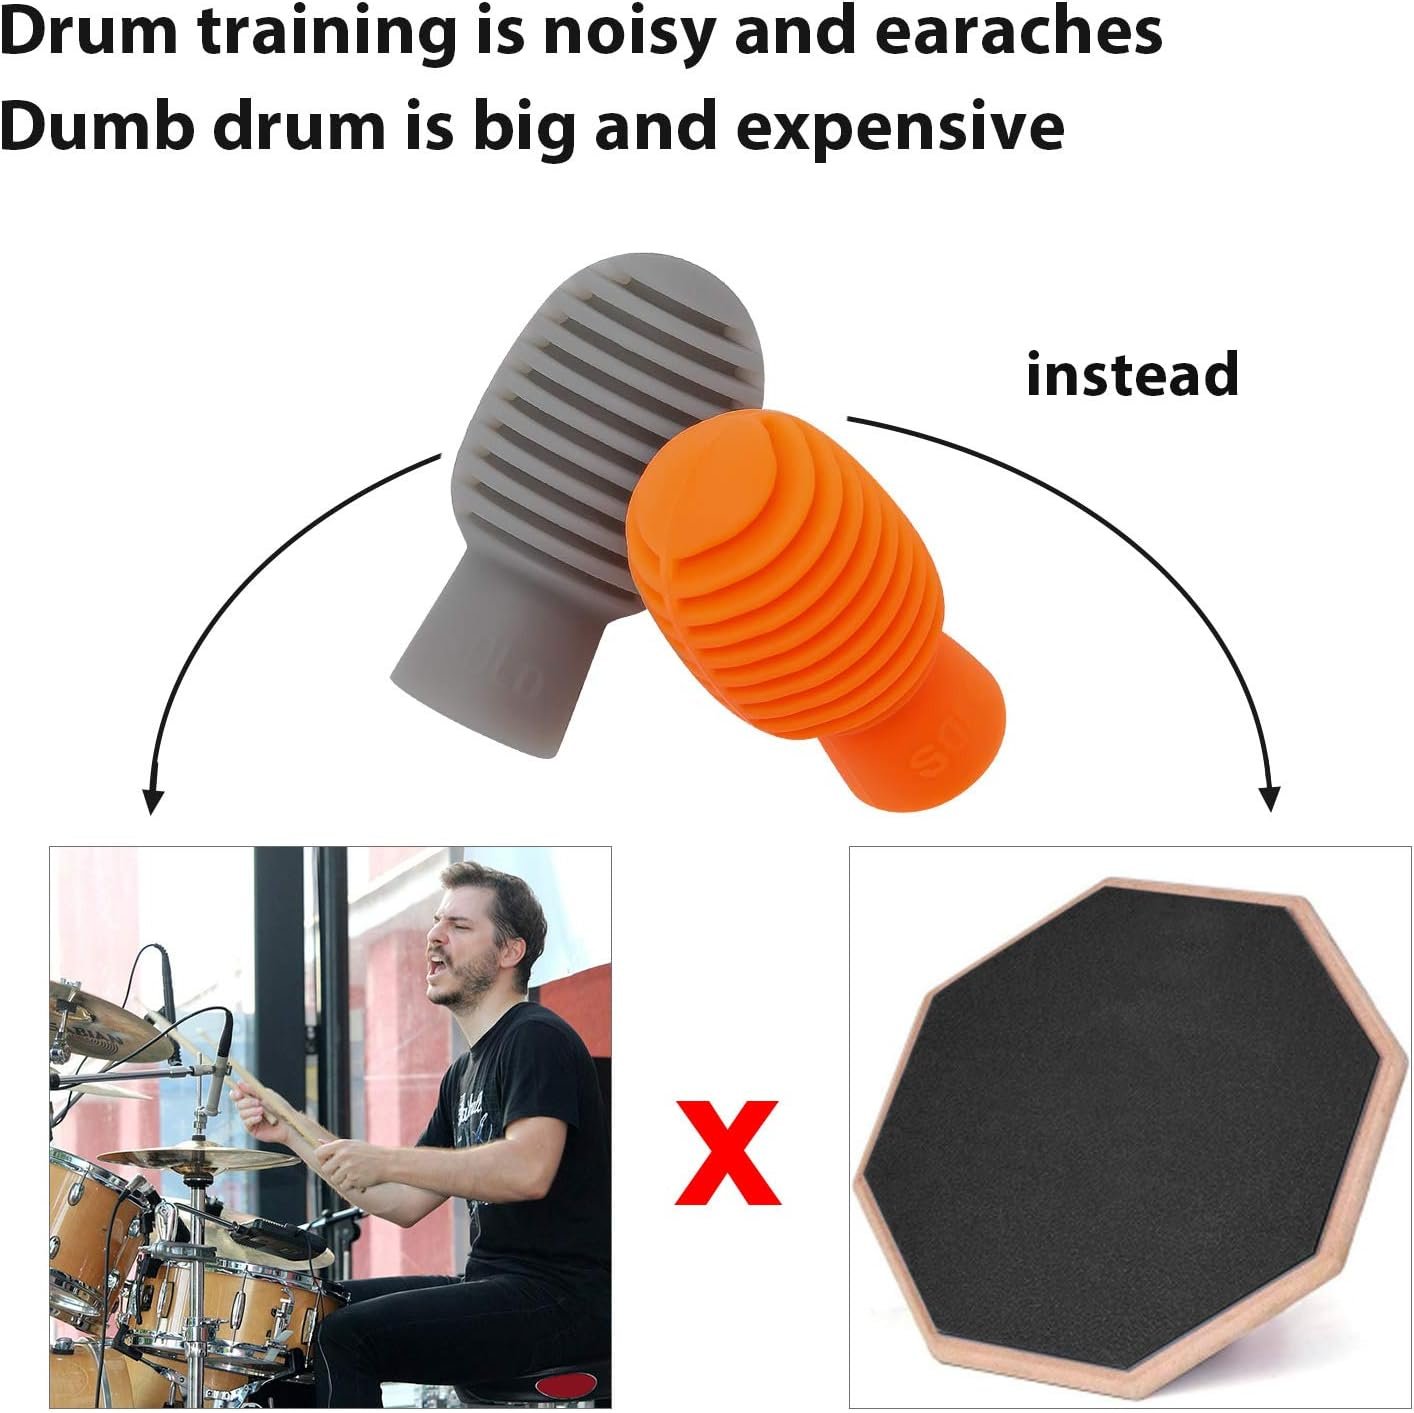 4 Pieces Drum Mute Drum Dampener Silicone Drumstick Silent Practice Tips Percussion Accessory Mute Replacement Musical Instruments Accessory (Orange, Grey,Grid)